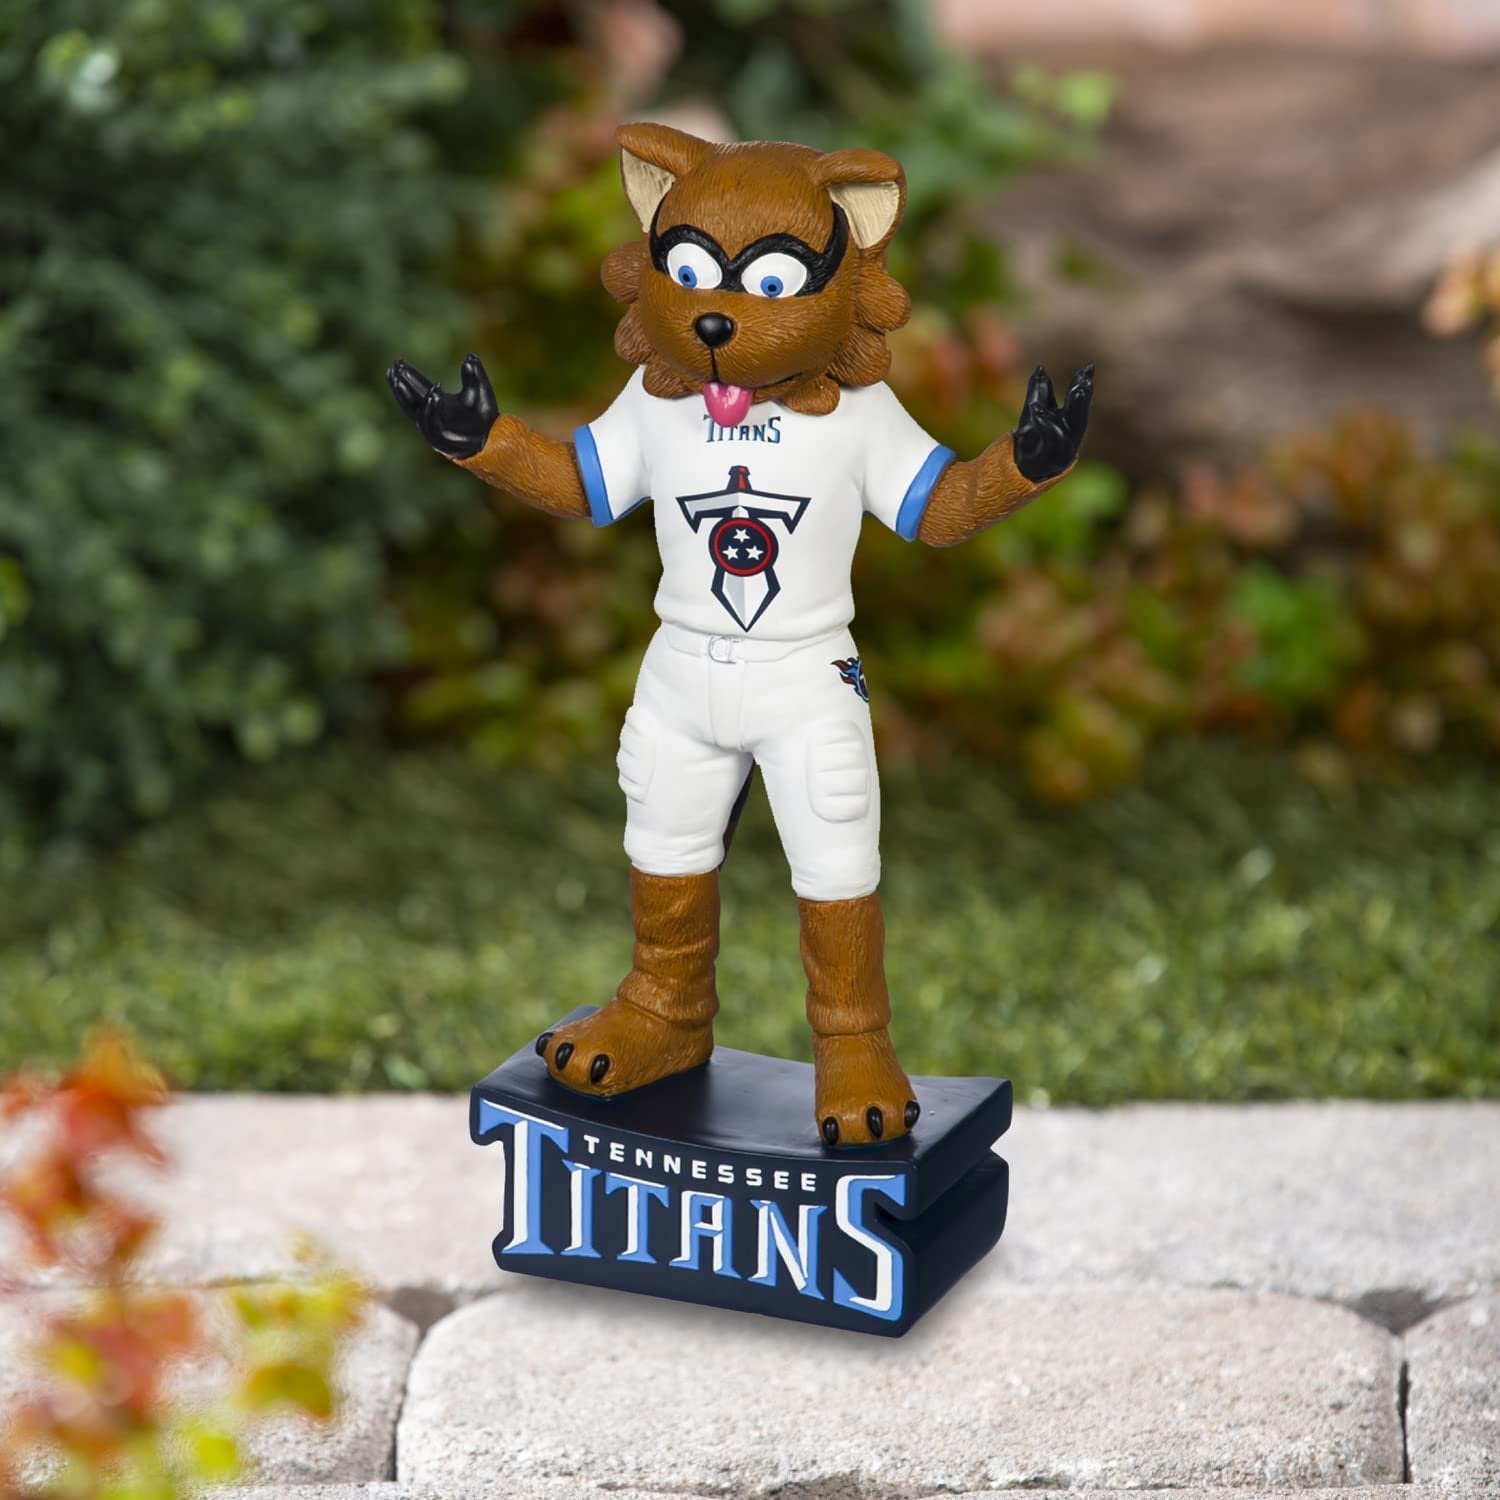 Tennessee Titans 12 Inch Mascot Tiki Totem Garden Statue Resin Outdoor Decoration